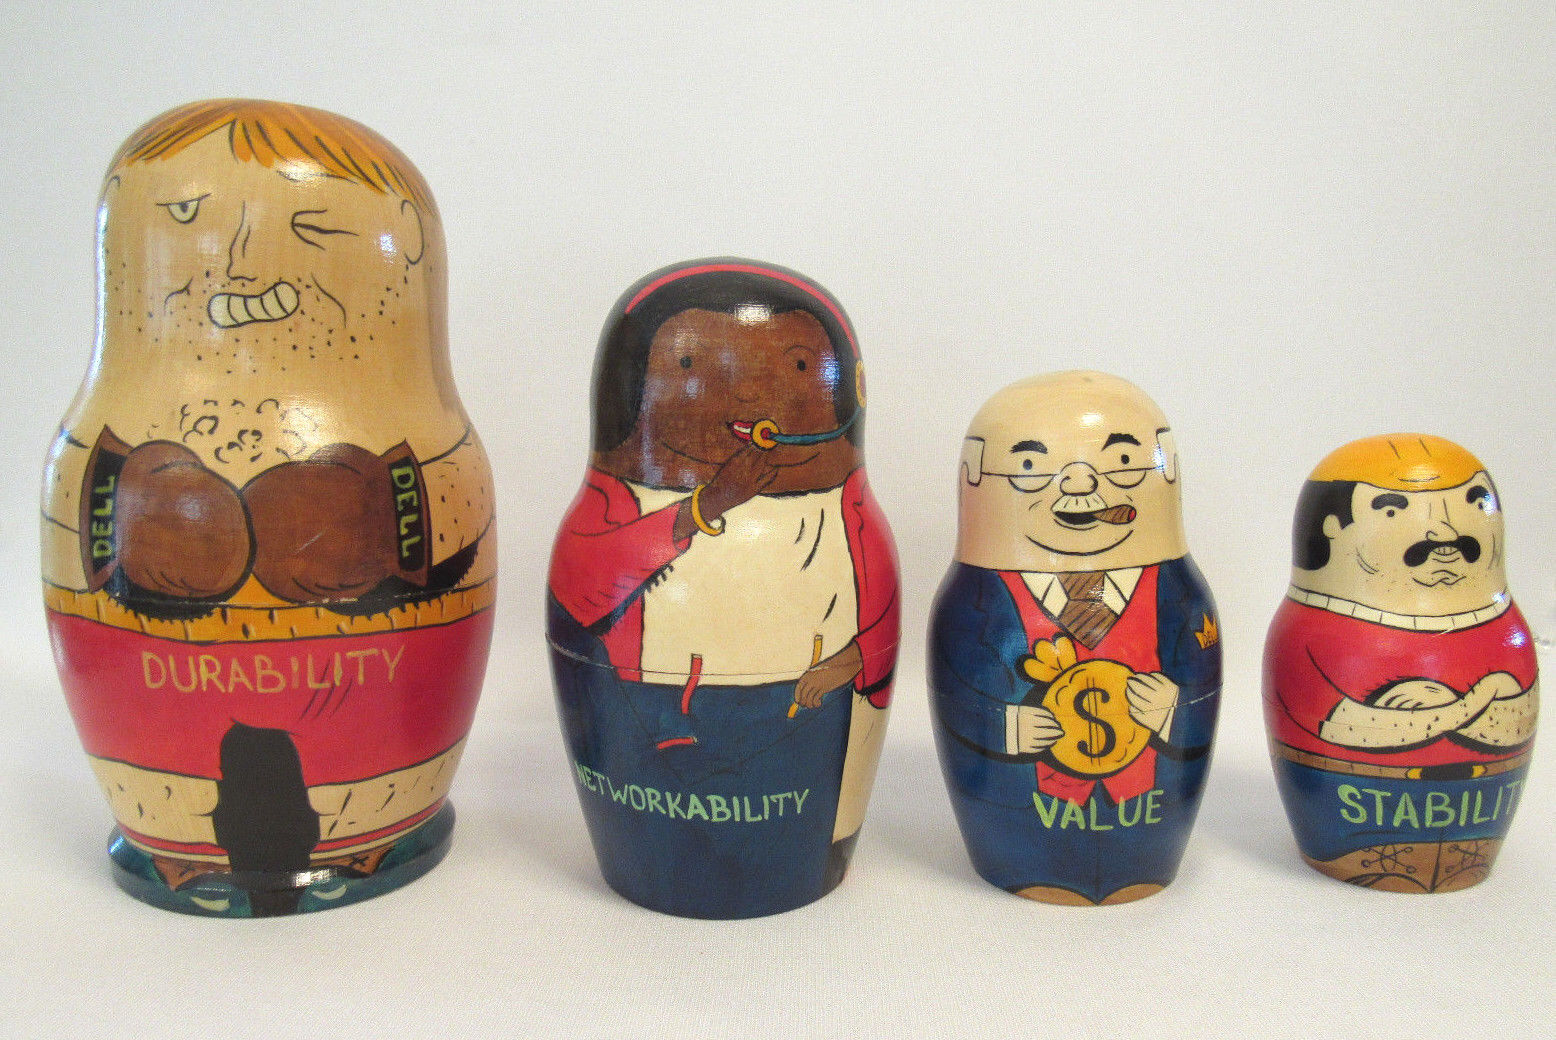 RARE VINTAGE 1980s DELL COMPUTER NESTING DOLL 4 DOLLS HAND PAINTED WOOD 8 1/2